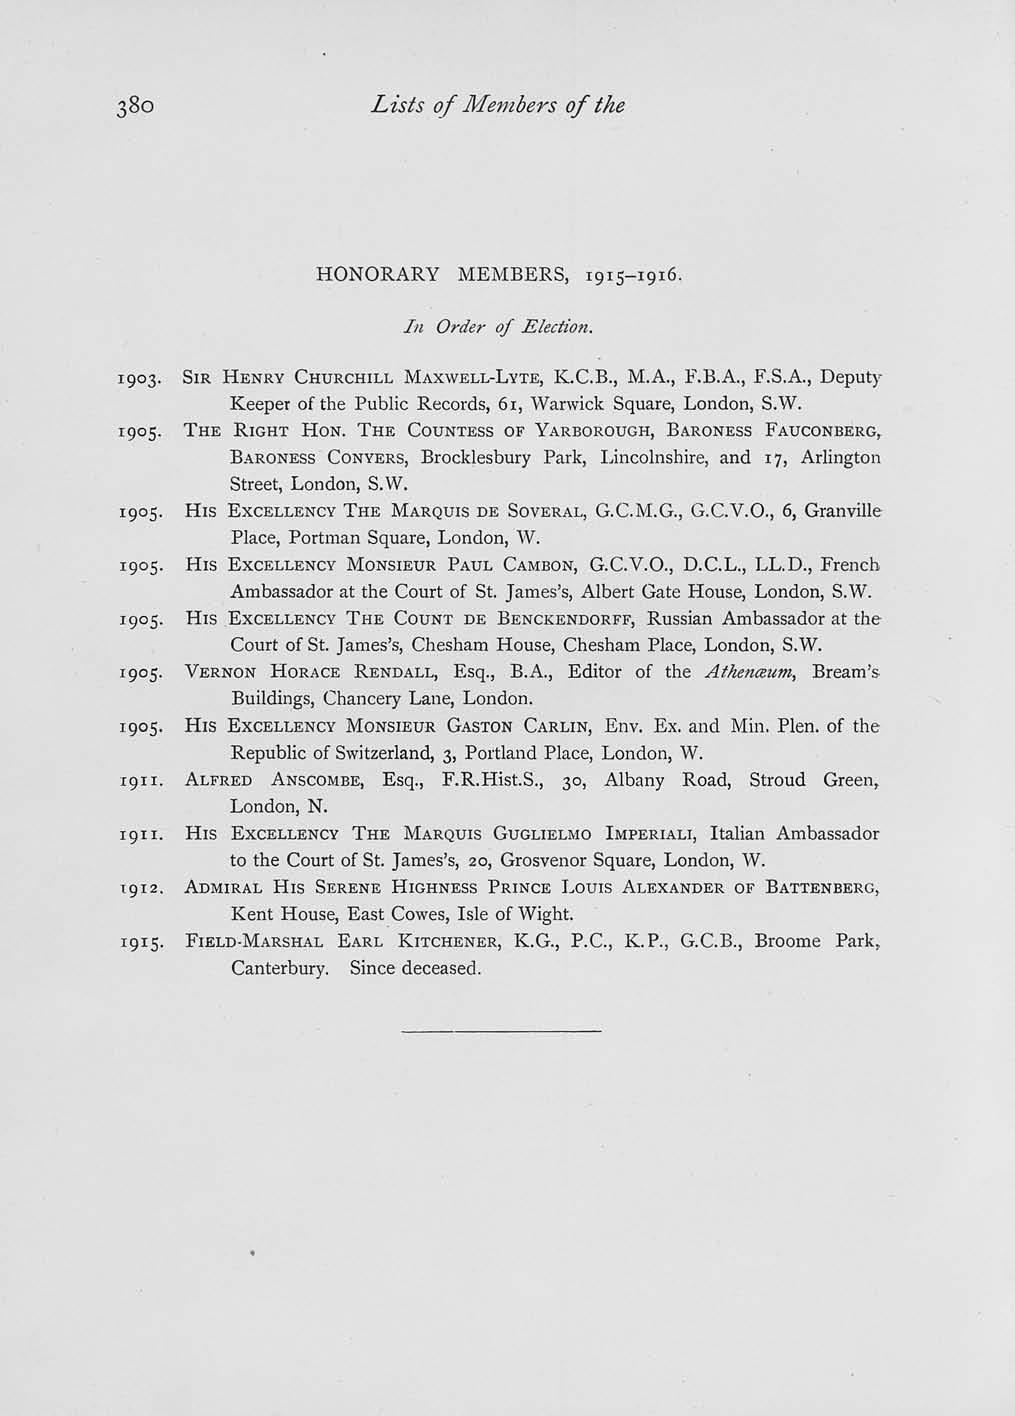 38o Lists of Members of the HONORARY MEMBERS, 1915-1916. In Order of Election. 1903. SIR HENRY CHURCHILL MAXWELL-LYTE, K.C.B., M.A., F.B.A., F.S.A., Deputy Keeper of the Public Records, 61, Warwick Square, London, S.